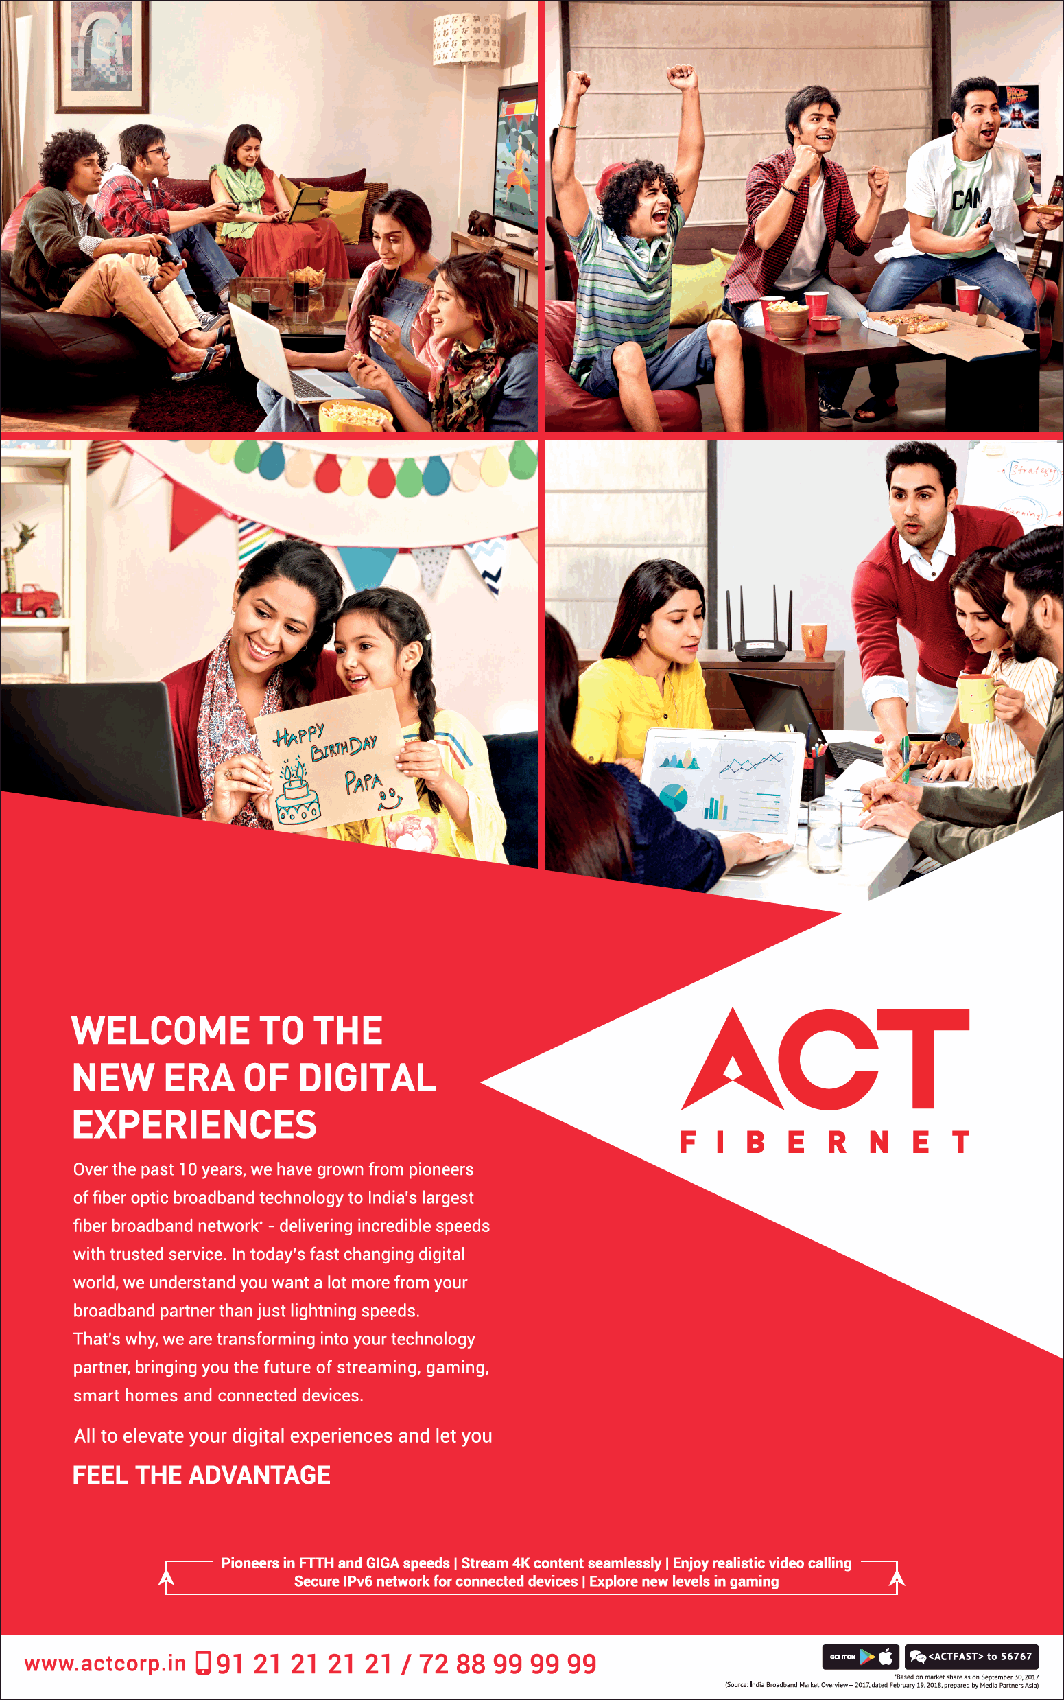 act-fibernet-welcome-to-the-new-era-of-digital-experiences-ad-times-of-india-bangalore-15-02-2019.png